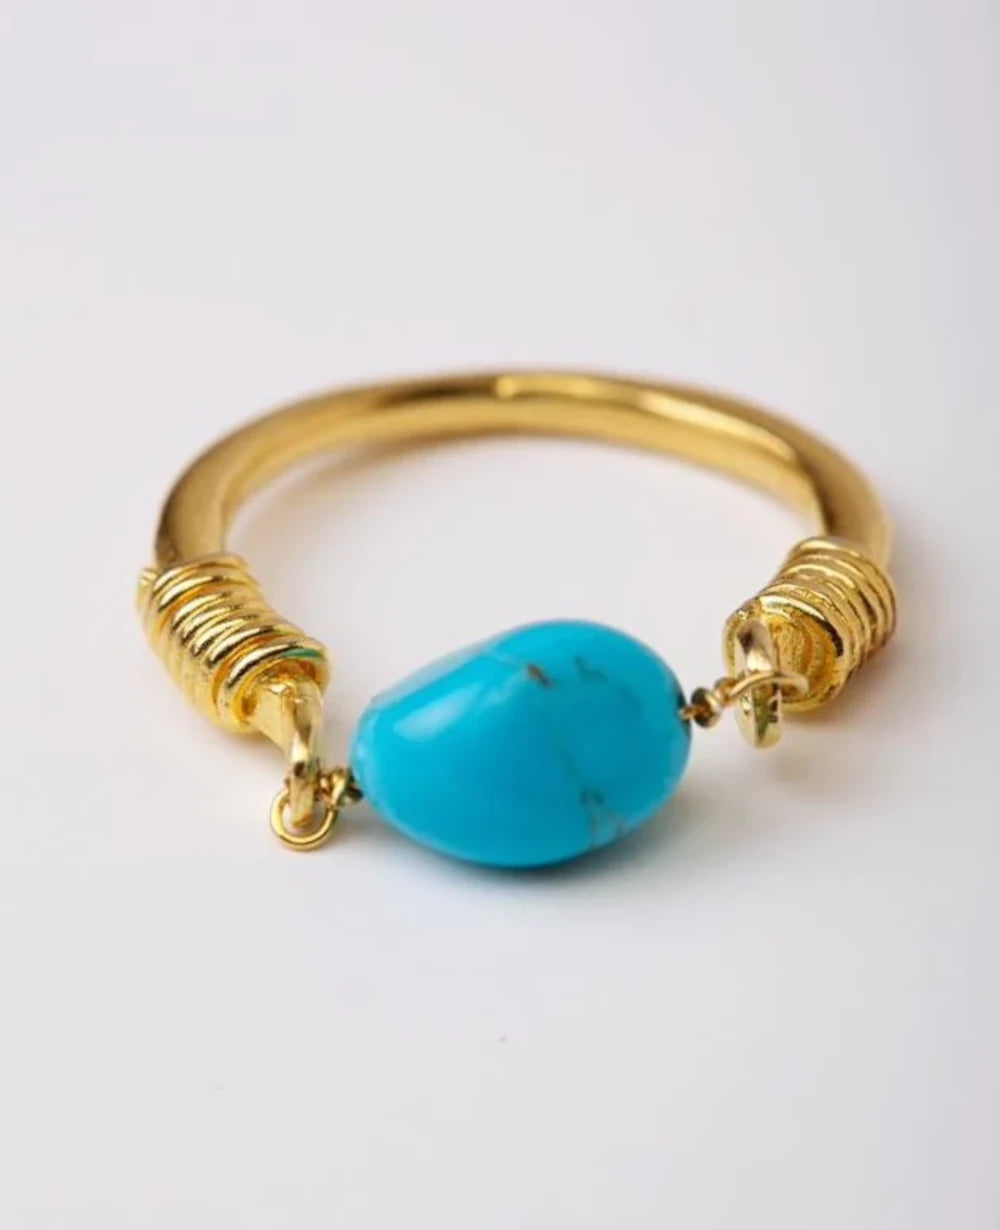 RING "SEA DREAM" GOLD/TURQUOISE